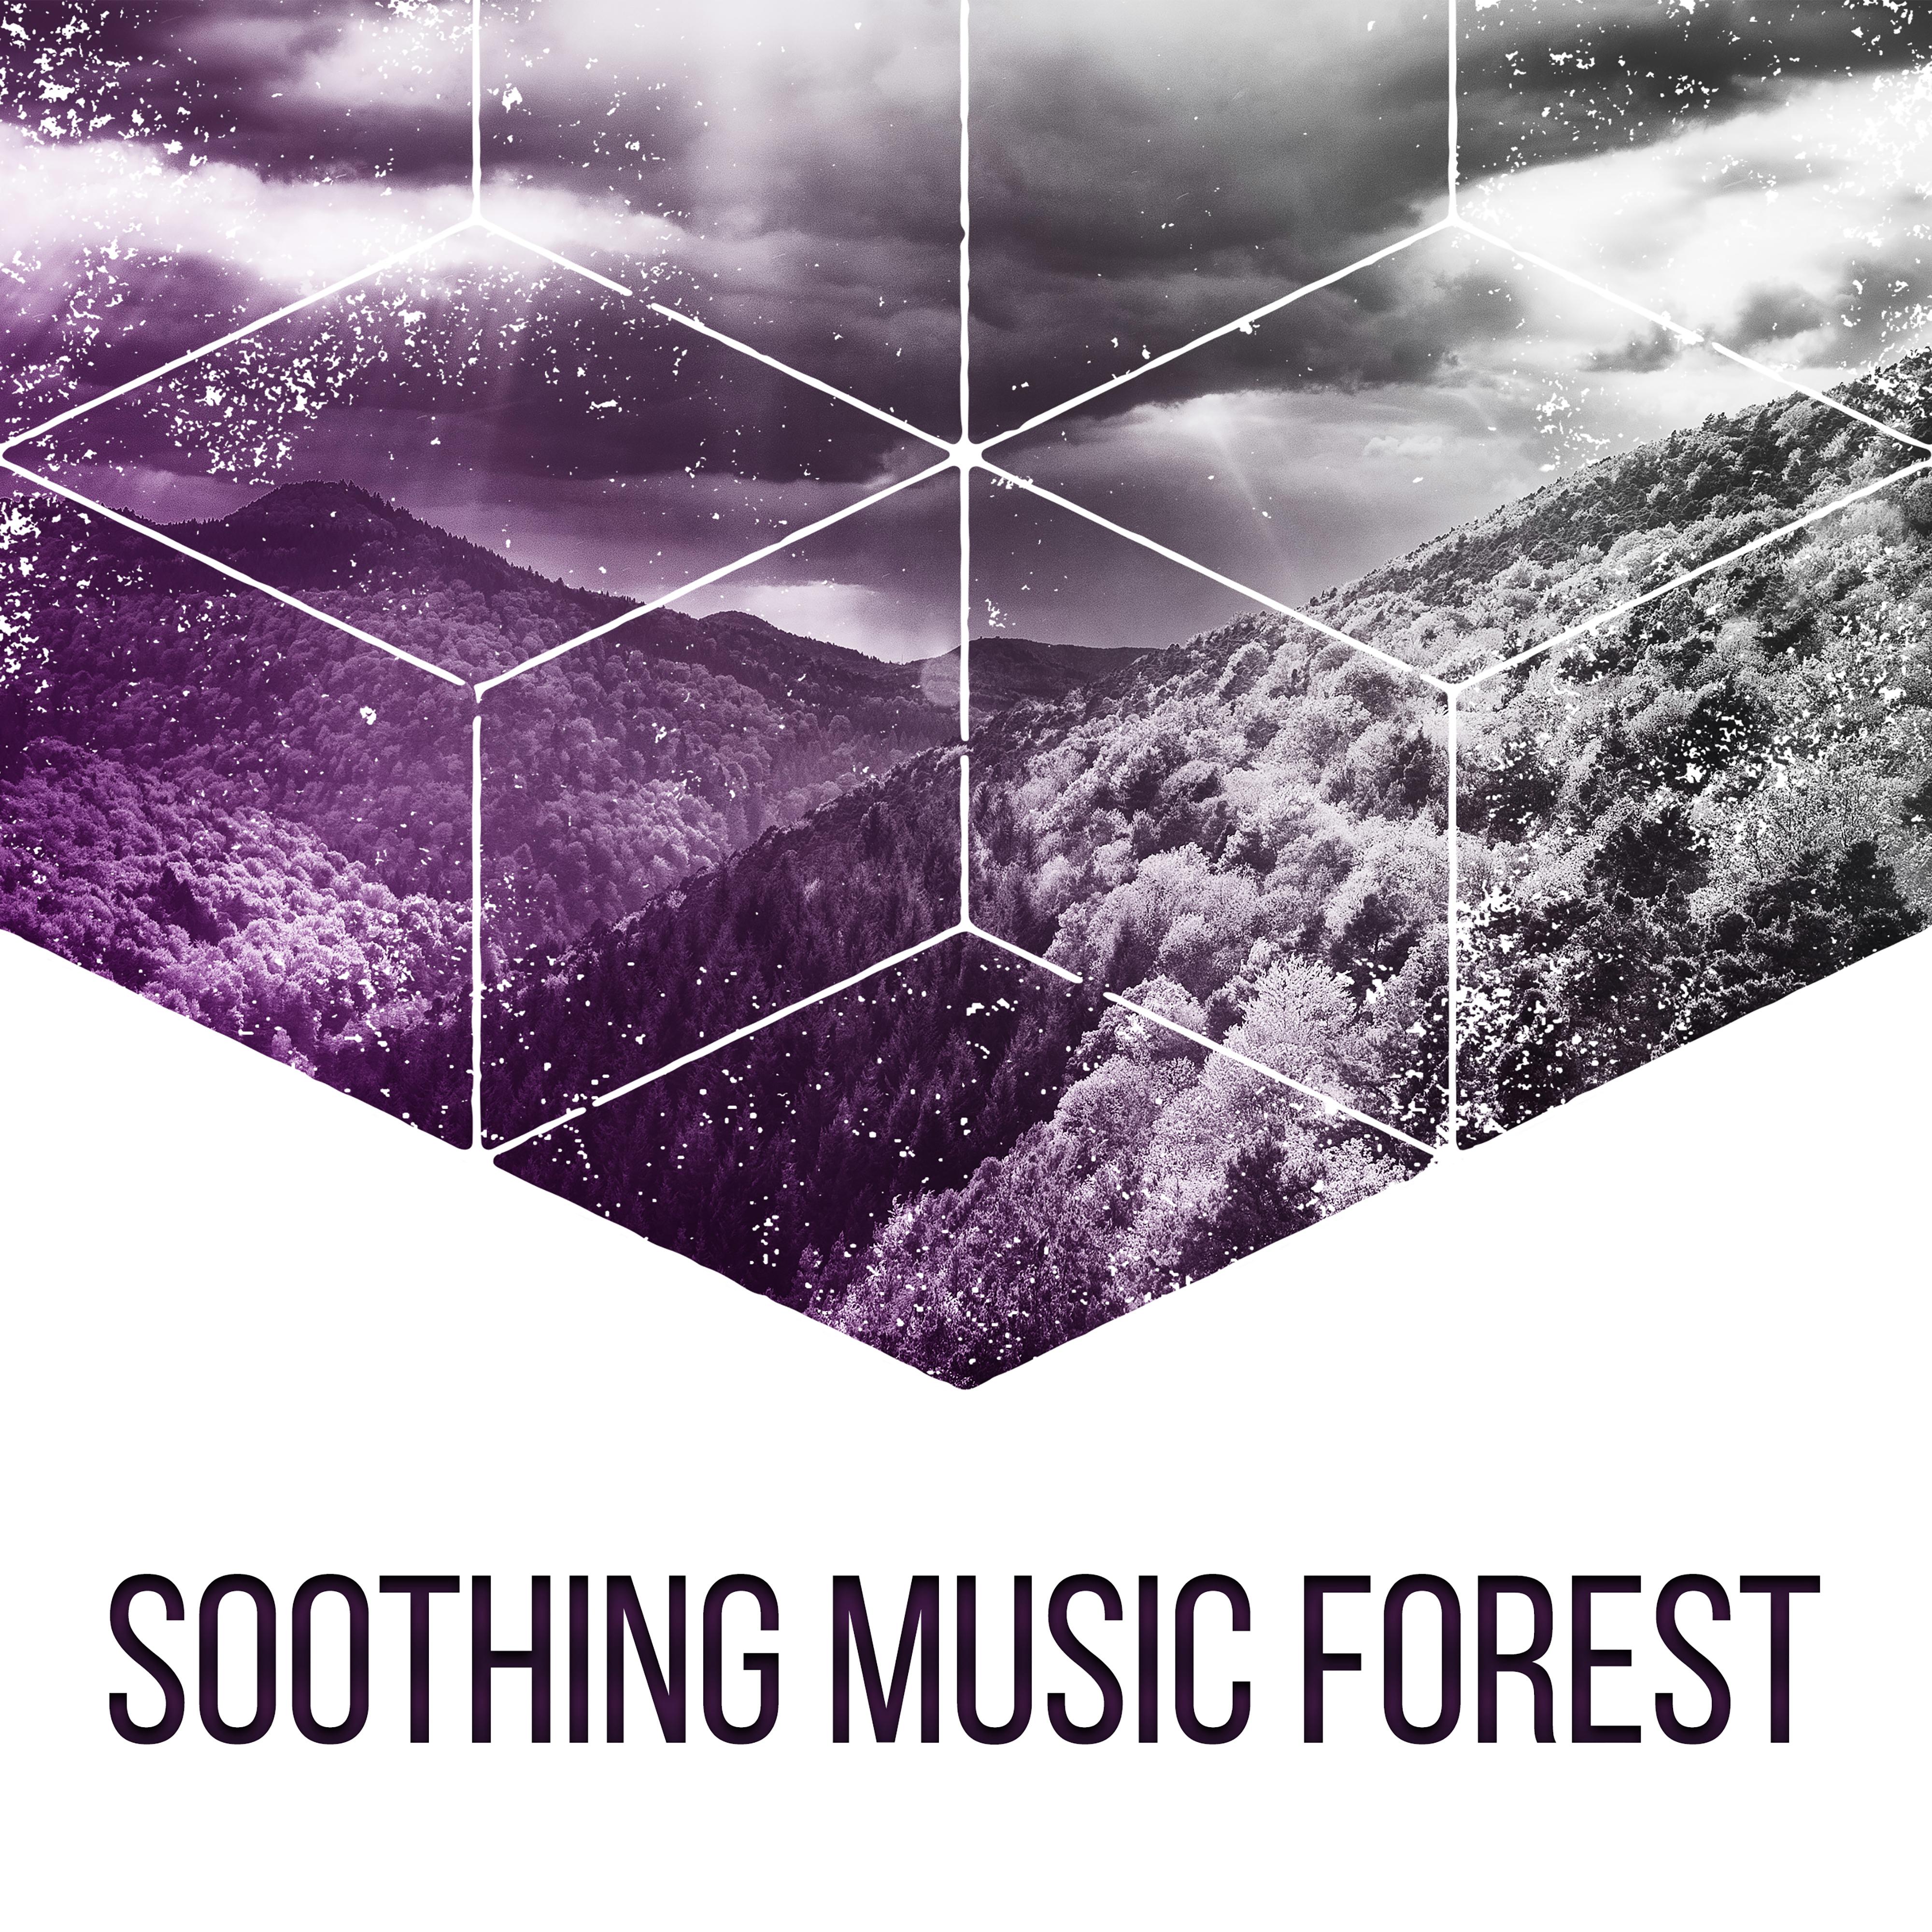 Soothing Music Forest  Nature Sounds for Relaxation, Classical Guitar, Birds Singing, Soft Melodies, Pure Mind, Sounds of Forest, Deep Sleep